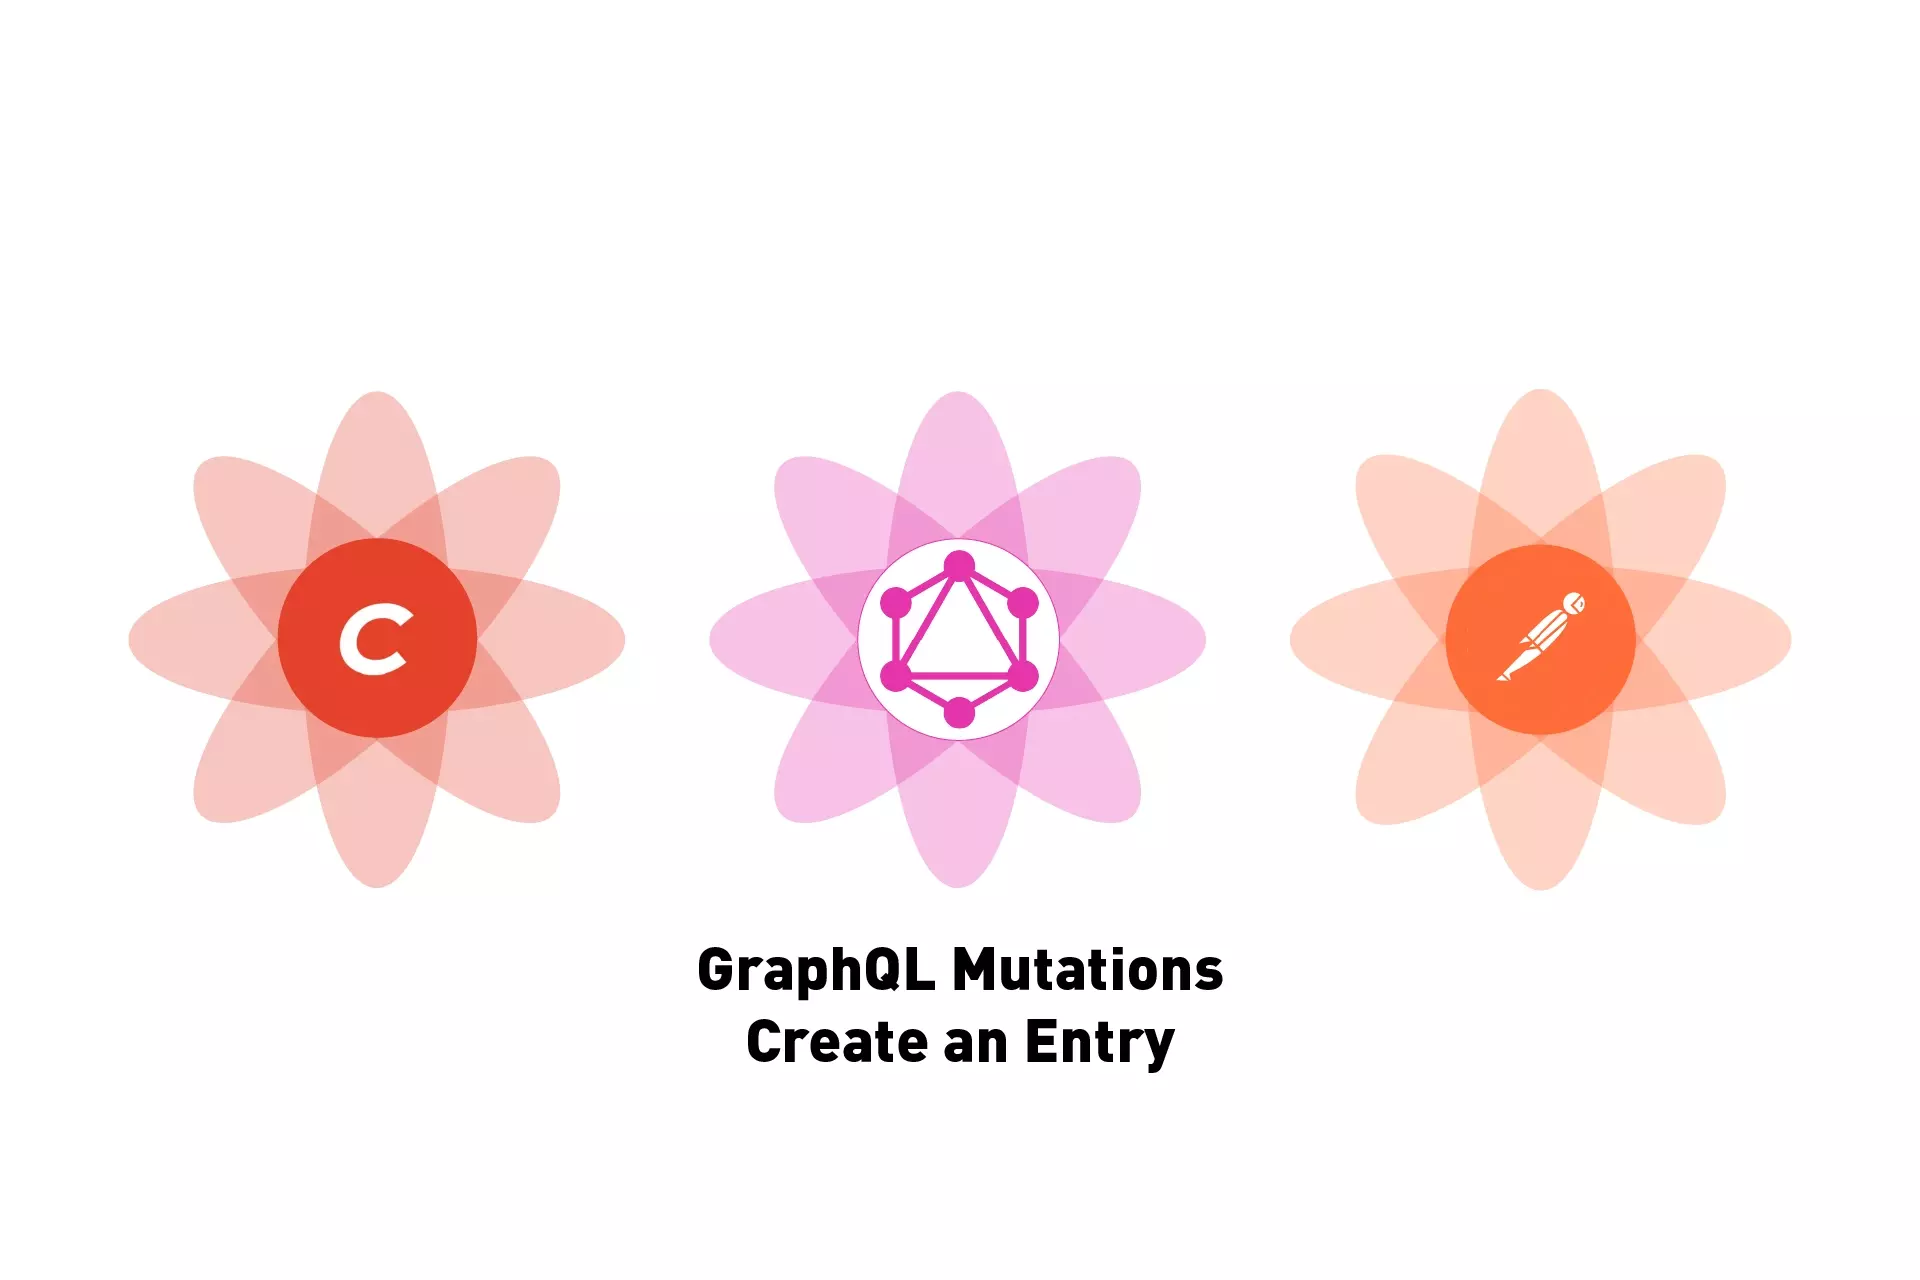 Three flowers that represent Craft CMS, GraphQL and Postman side by side. Beneath them sits the text "GraphQL Mutations Create an Entry."